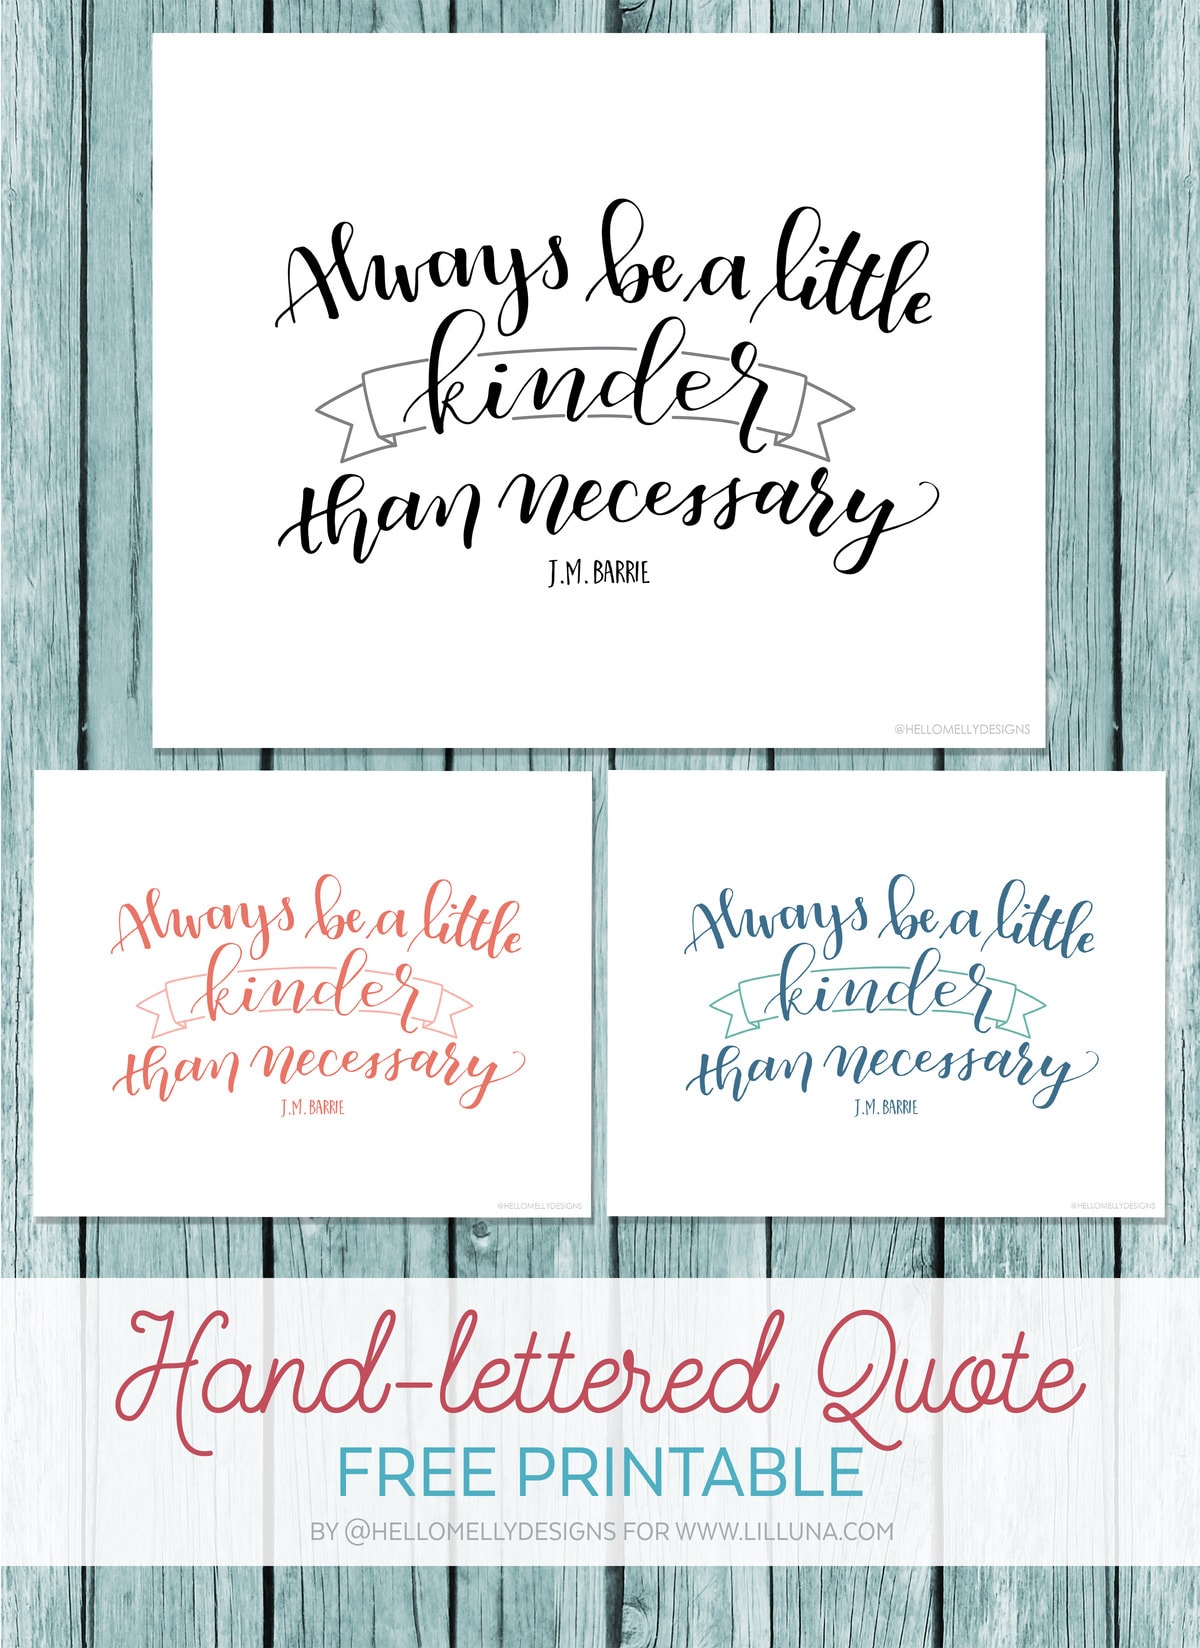 Always be a little kinder than necessary. Free Printable in 3 colors that can downloaded, printed and displayed in your own home. 